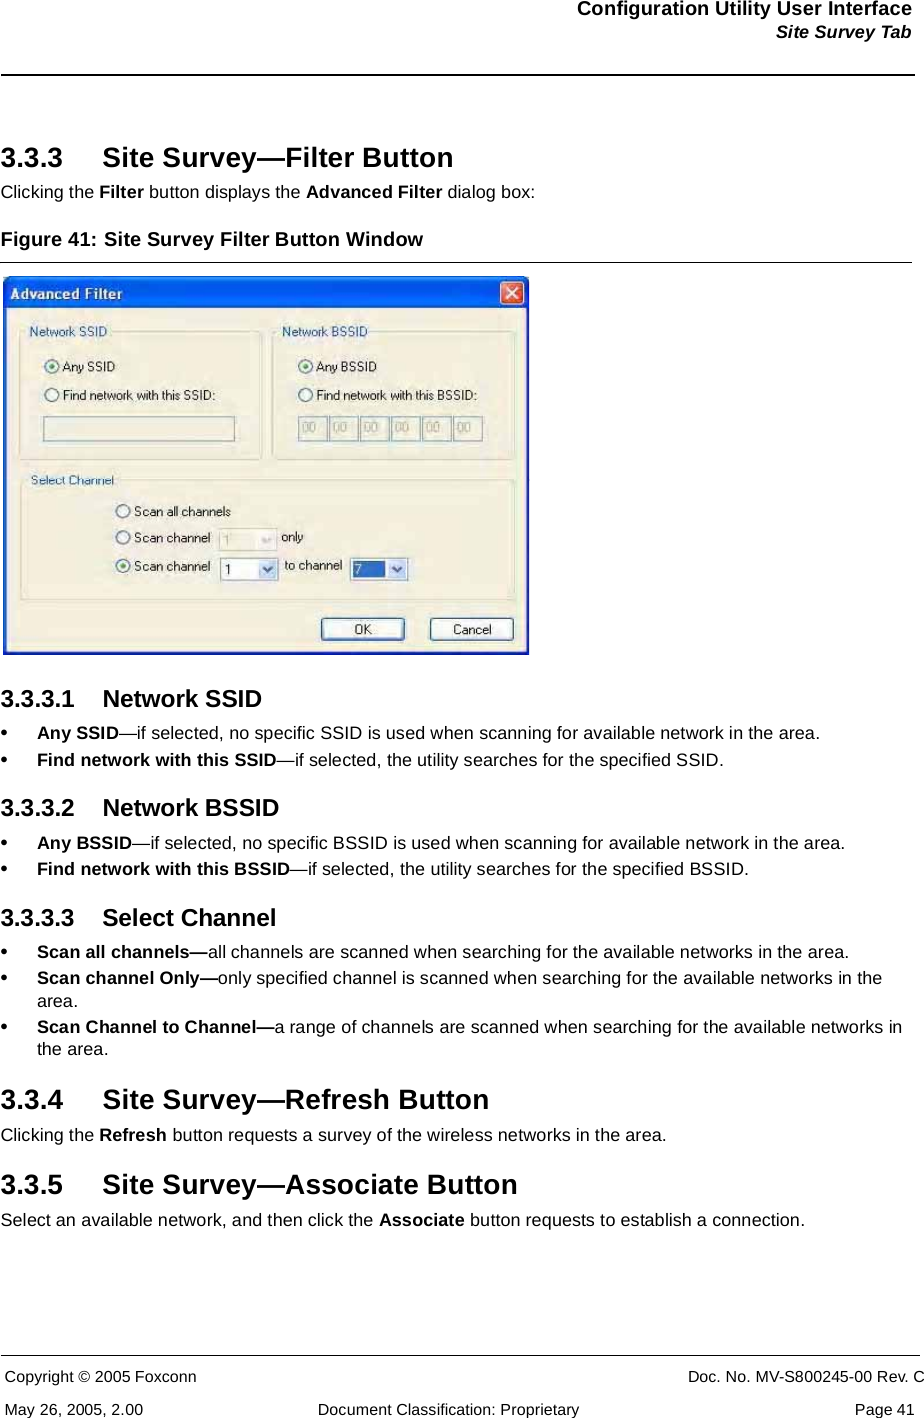 Configuration Utility User InterfaceSite Survey TabCopyright © 2005 Foxconn CONFIDENTIAL Doc. No. MV-S800245-00 Rev. CMay 26, 2005, 2.00 Document Classification: Proprietary  Page 413.3.3 Site Survey—Filter ButtonClicking the Filter button displays the Advanced Filter dialog box:Figure 41: Site Survey Filter Button Window 3.3.3.1 Network SSID•Any SSID—if selected, no specific SSID is used when scanning for available network in the area.•Find network with this SSID—if selected, the utility searches for the specified SSID.3.3.3.2 Network BSSID•Any BSSID—if selected, no specific BSSID is used when scanning for available network in the area.•Find network with this BSSID—if selected, the utility searches for the specified BSSID.3.3.3.3 Select Channel•Scan all channels—all channels are scanned when searching for the available networks in the area.•Scan channel Only—only specified channel is scanned when searching for the available networks in the area.•Scan Channel to Channel—a range of channels are scanned when searching for the available networks in the area.3.3.4 Site Survey—Refresh ButtonClicking the Refresh button requests a survey of the wireless networks in the area.3.3.5 Site Survey—Associate ButtonSelect an available network, and then click the Associate button requests to establish a connection.